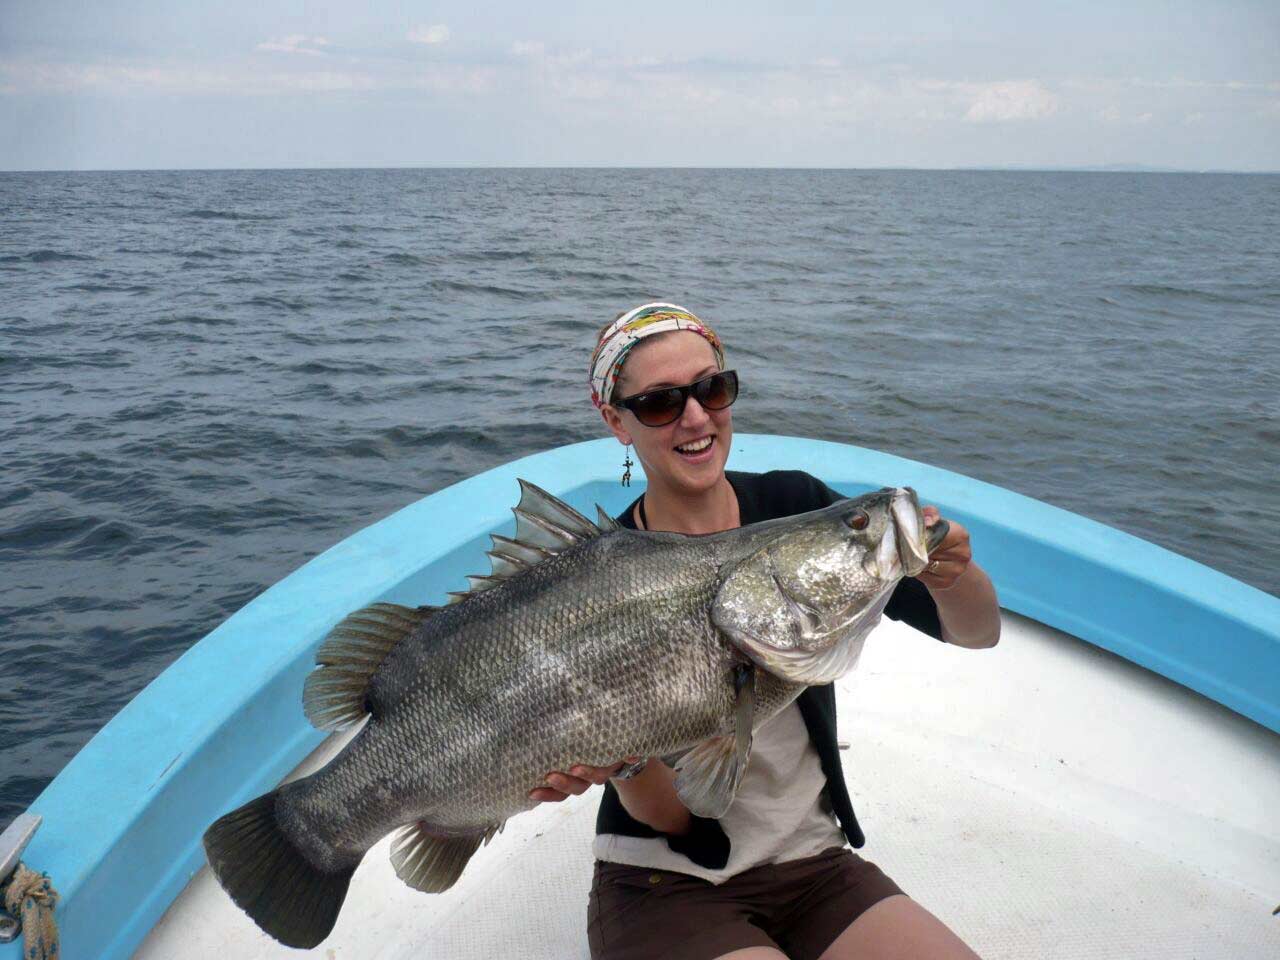 Half-Day Fishing on Lake Victoria: 4 hours of Fishing for as Low as $170pp